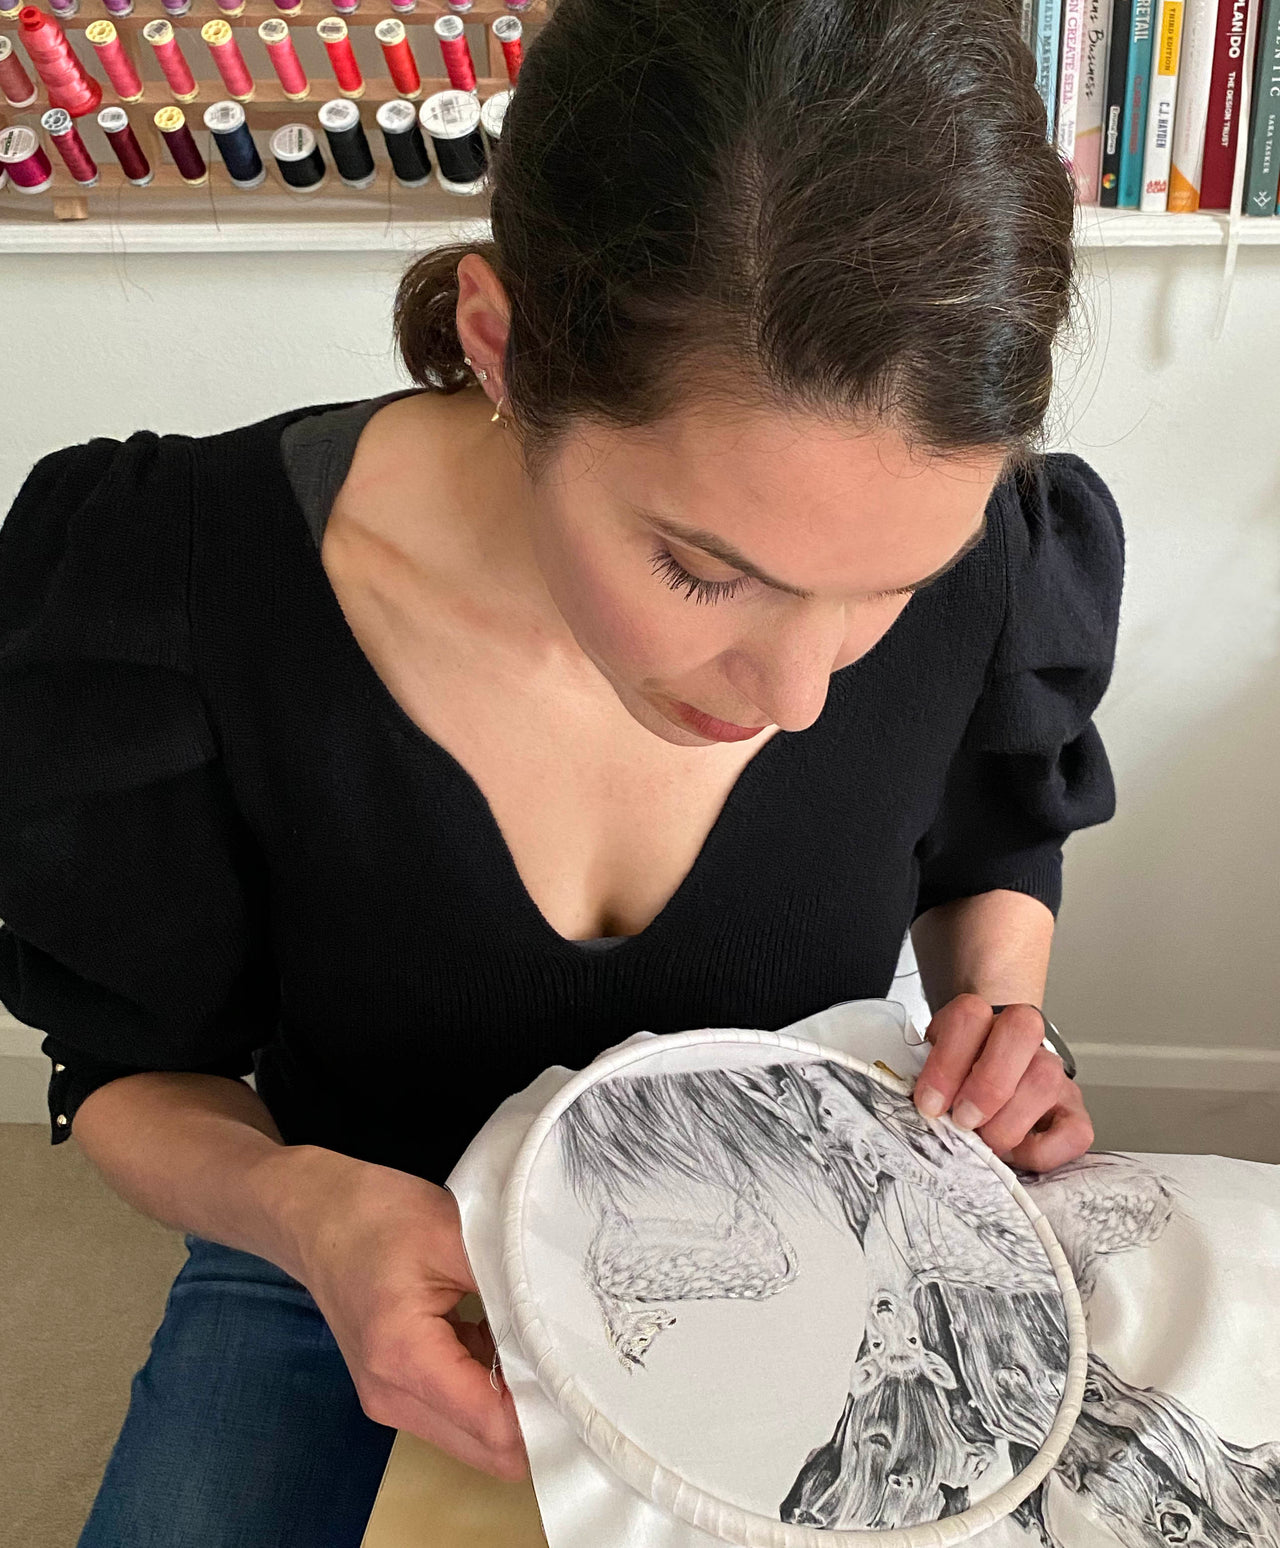 Susannah hand embroidering using a hoop